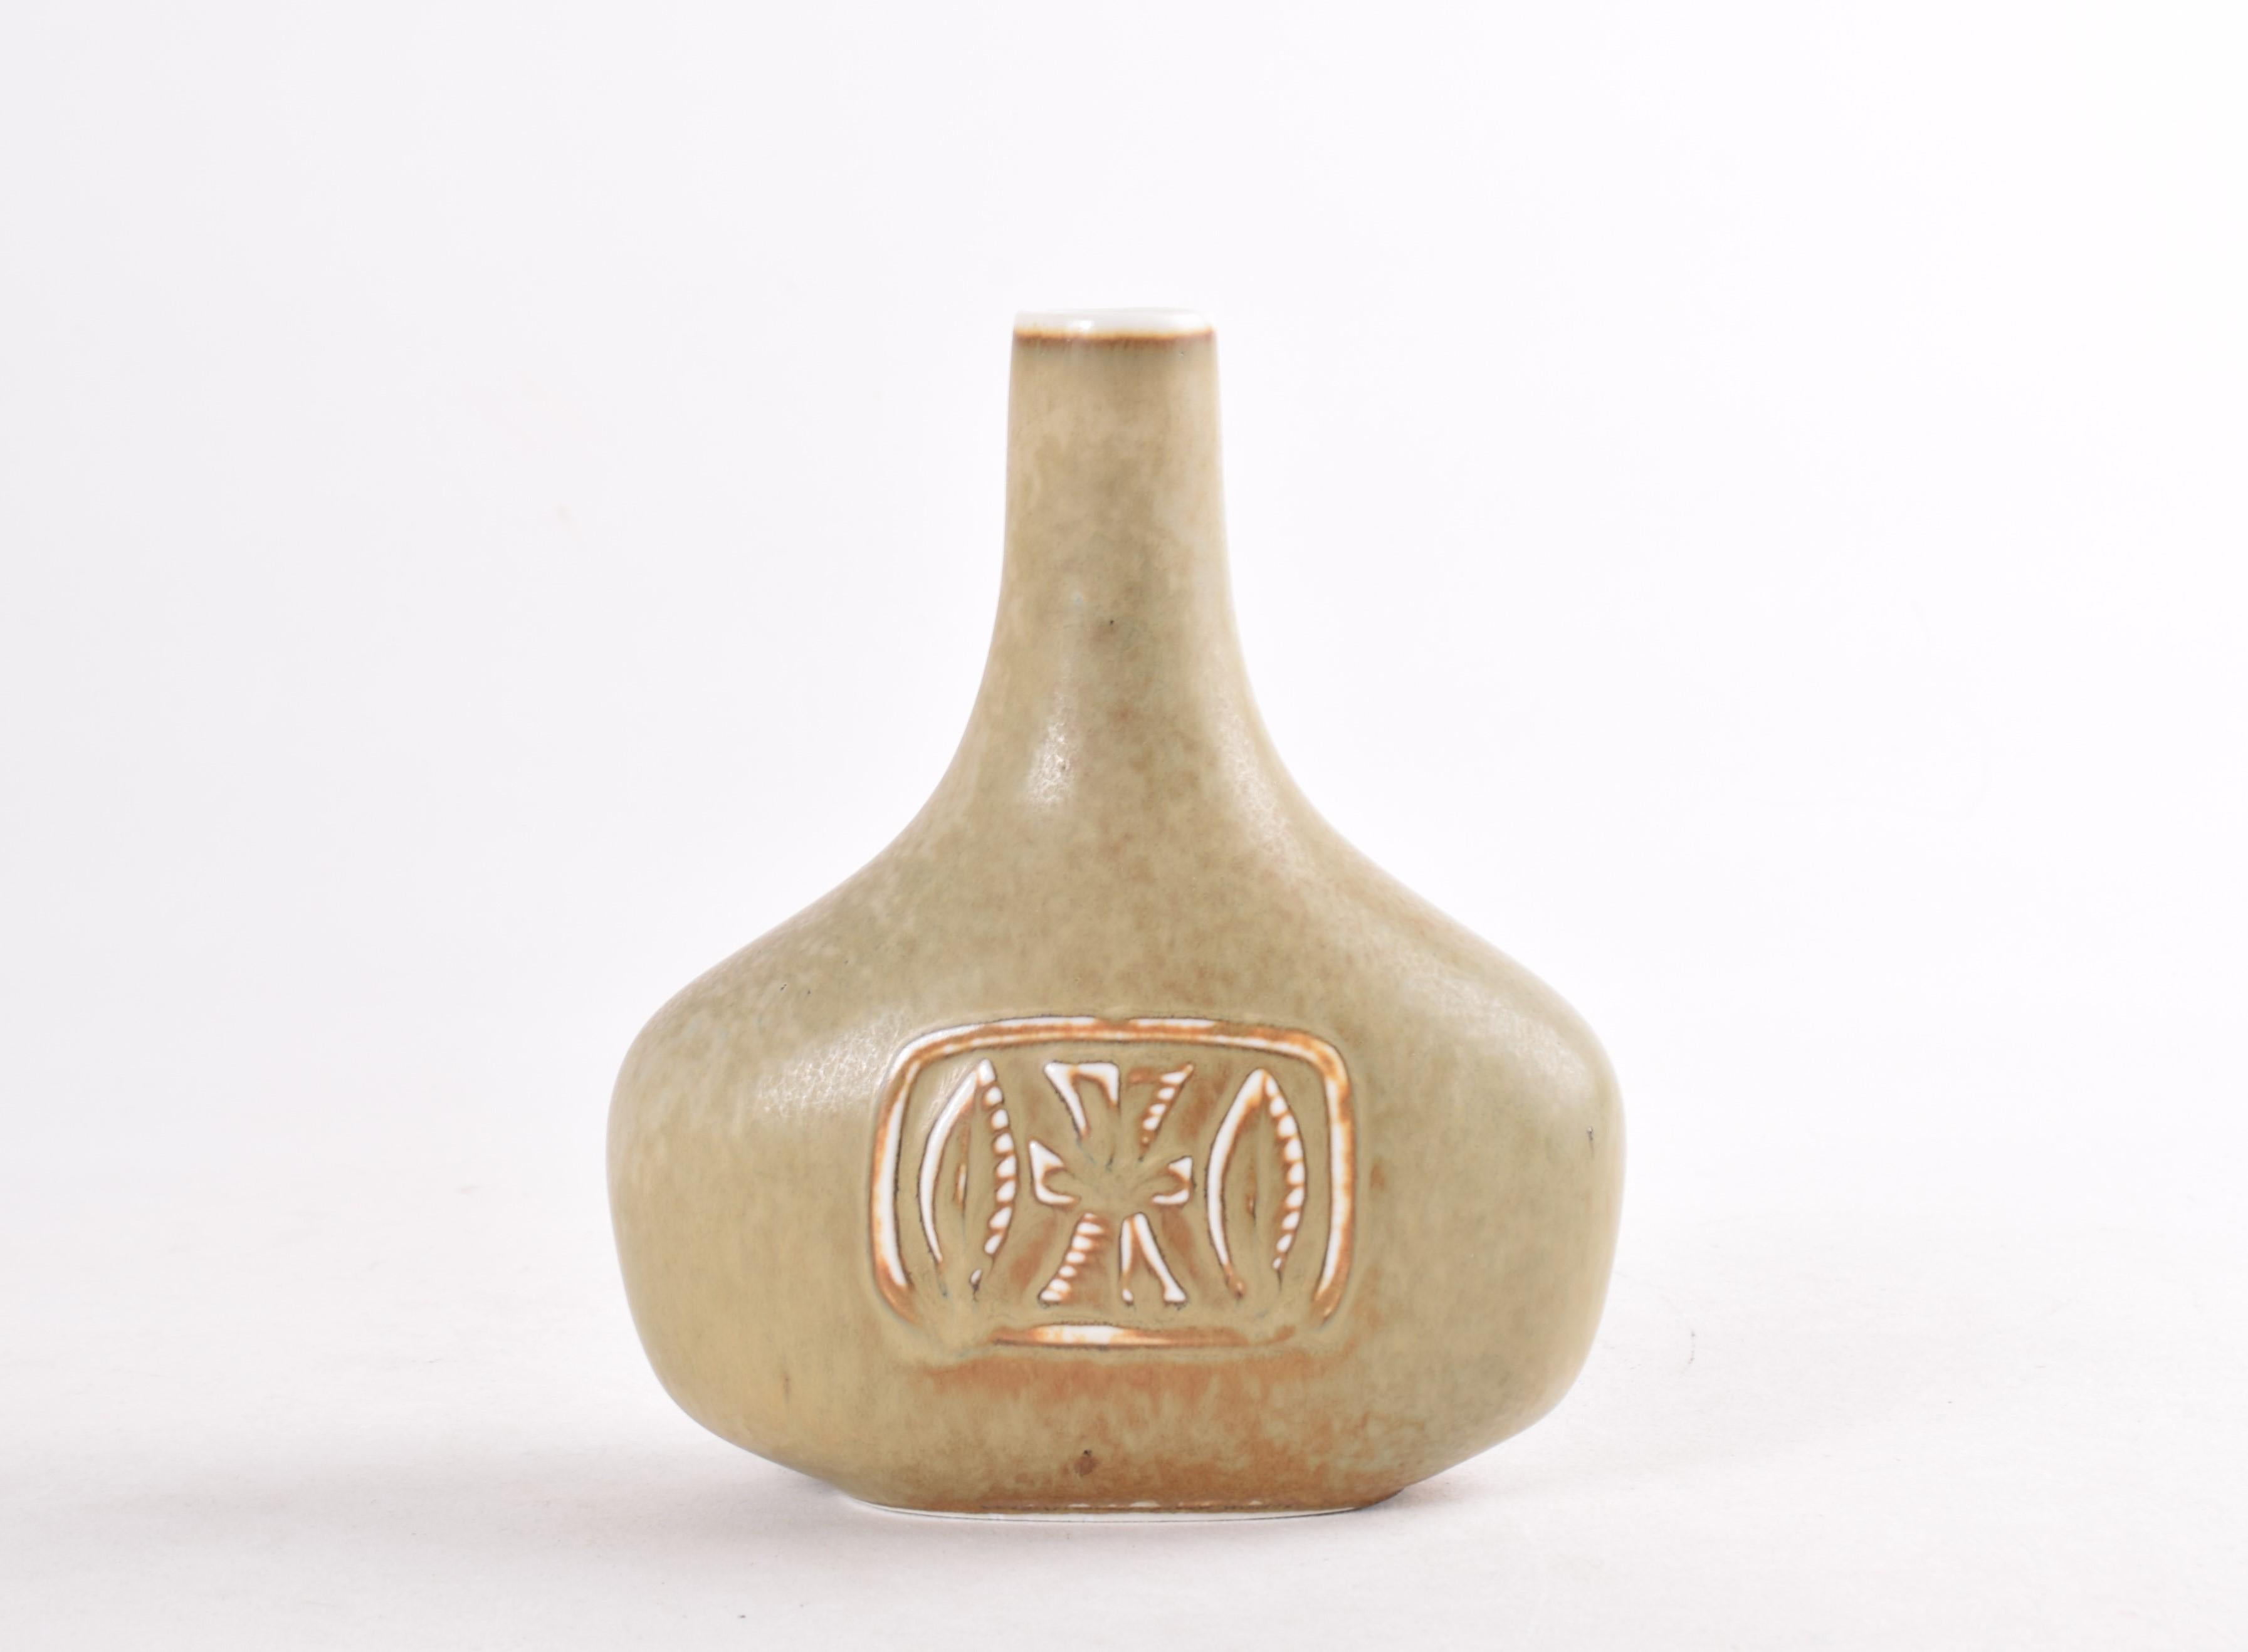 Scandinavian Mid-century vase by Swedish designer Gunnar Nylund (1904-97) for Rörstrand, Sweden. Made ca 1950s to 1960s.

The bottle shaped vase has a haresfur glaze in light olive green beige with a little ochre.

The vase is fully marked on bottom